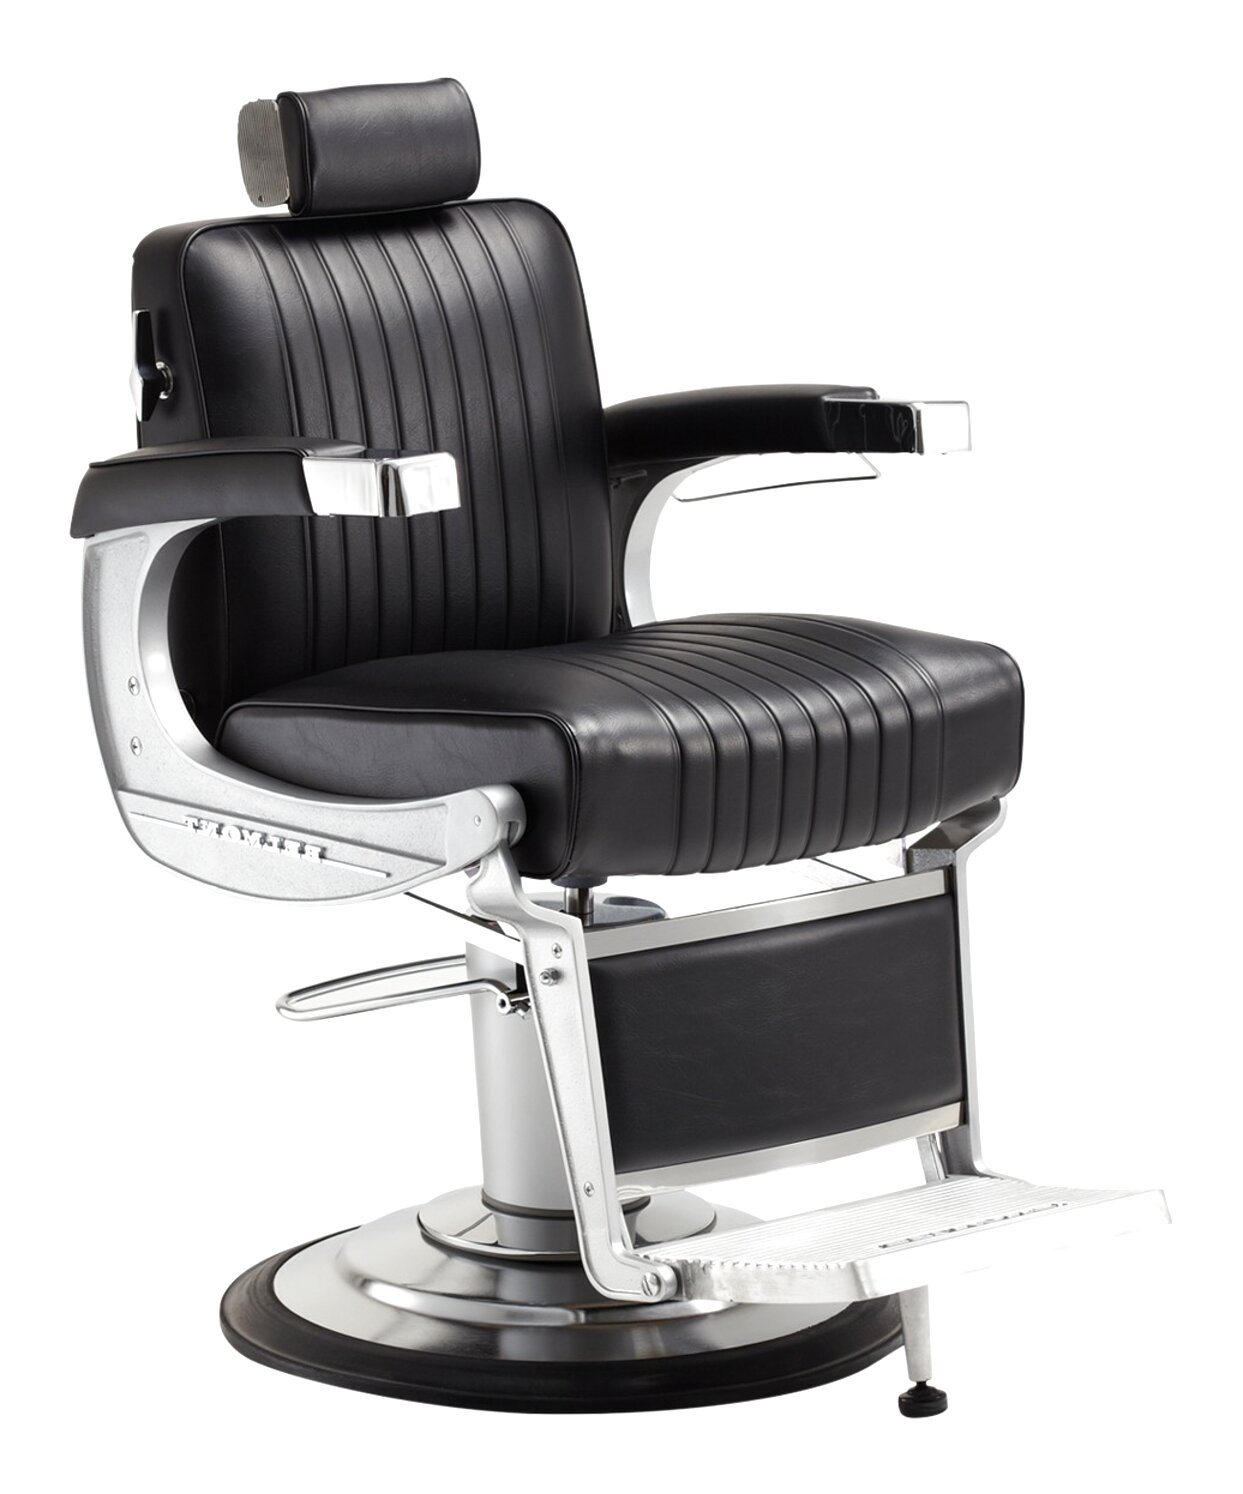 Belmont Barber for sale in UK | 45 used Belmont Barbers